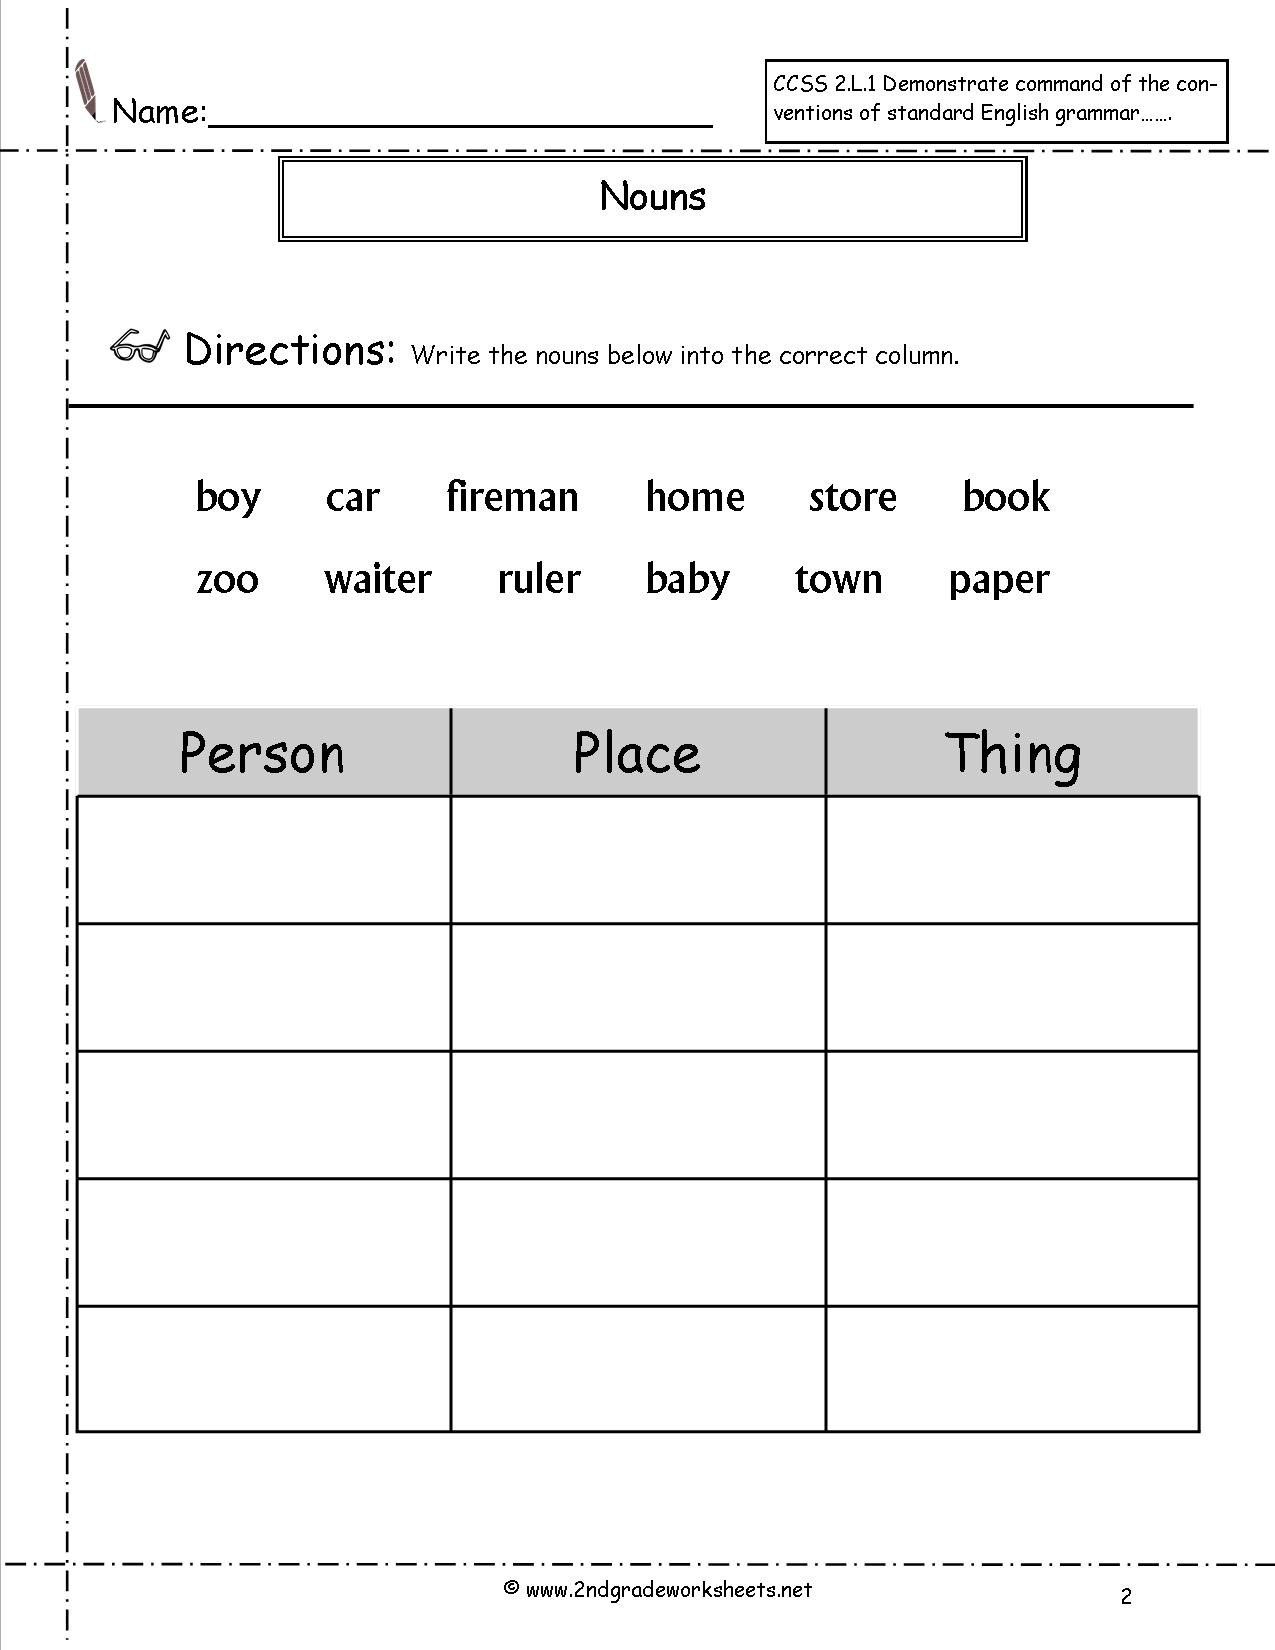 Nouns Worksheets And Printouts For Free Noun Worksheets